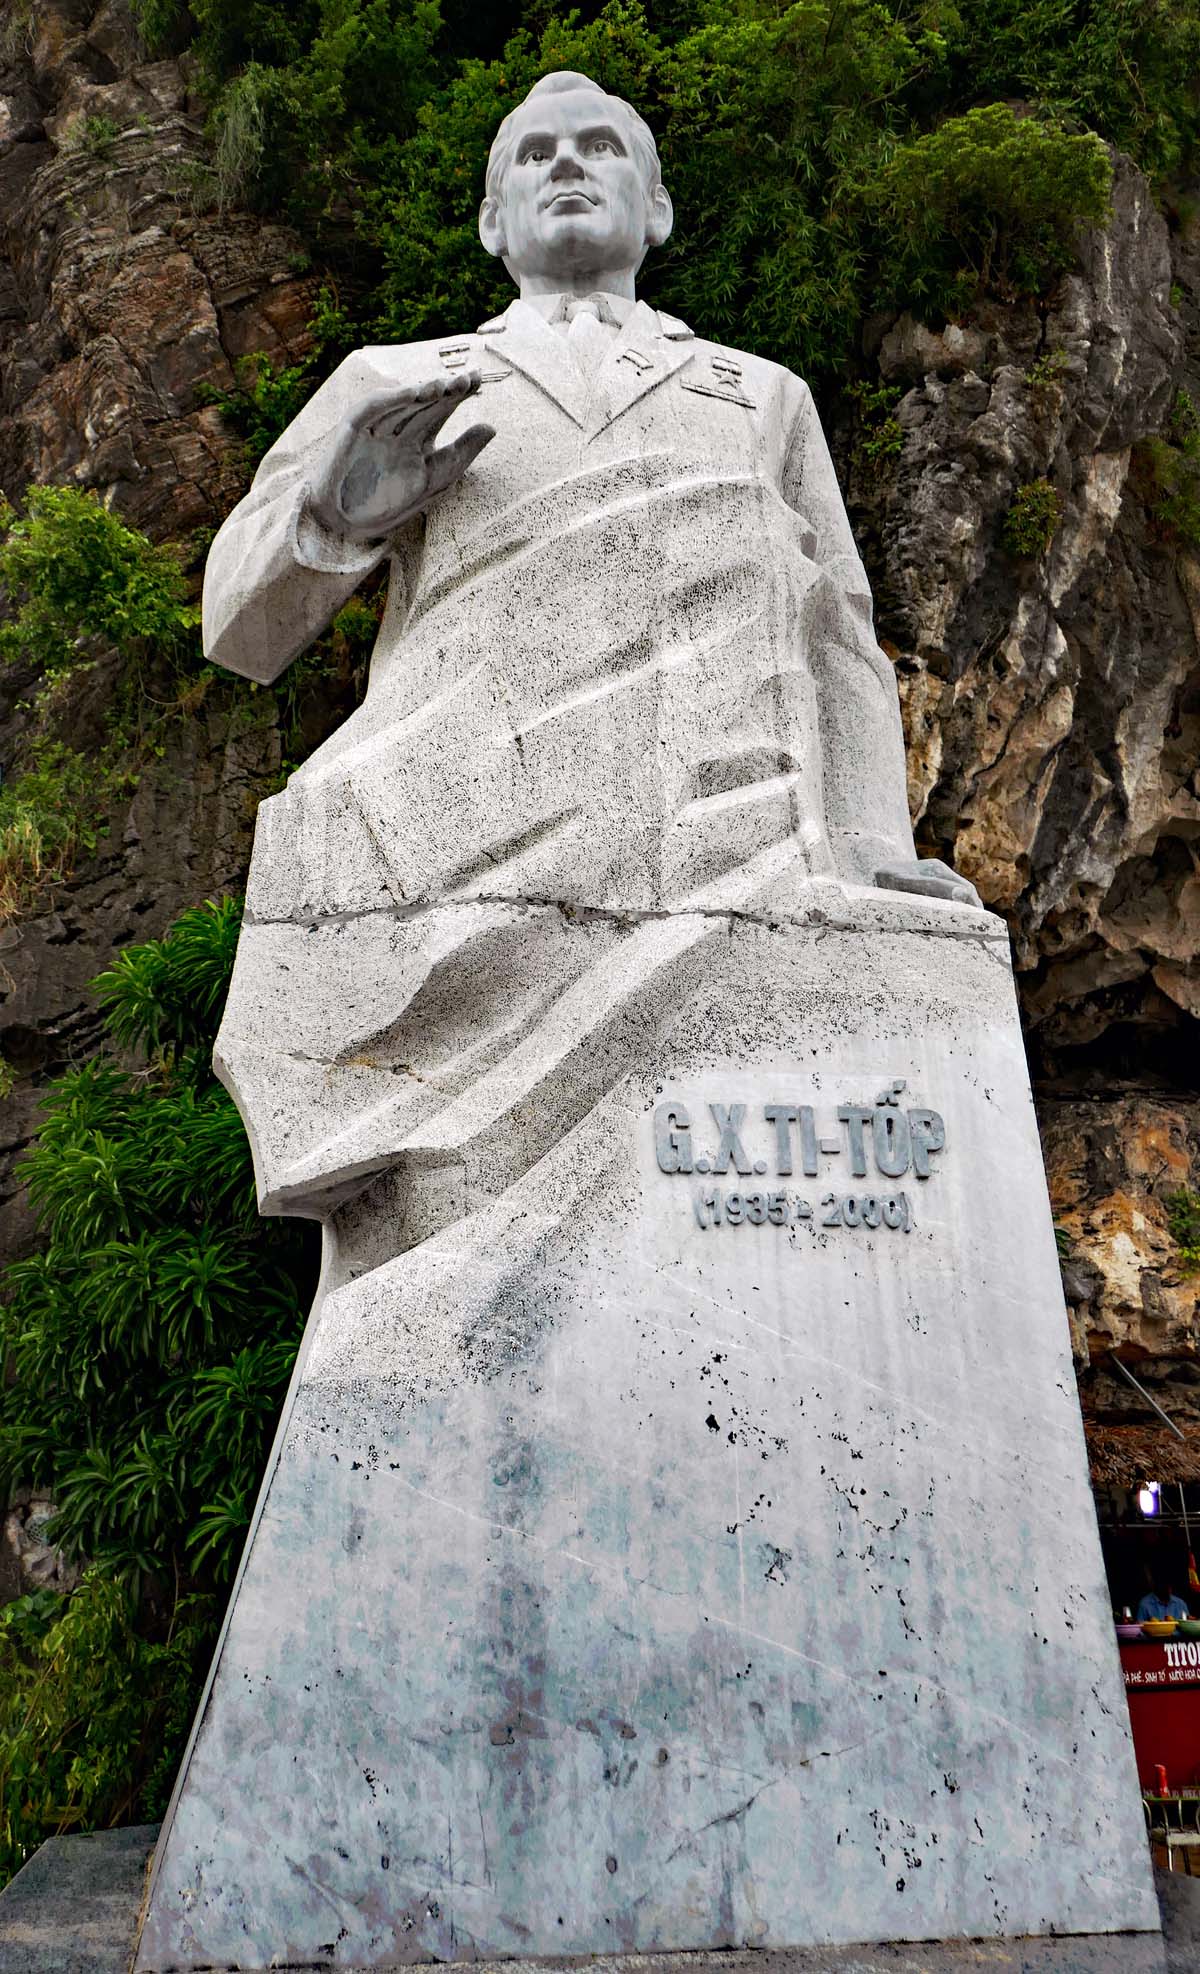 The Ti Top island has a statue honoring the Russian Cosmonaut that is tis named for, Gherman Stepanovich Titov (1935-2000).